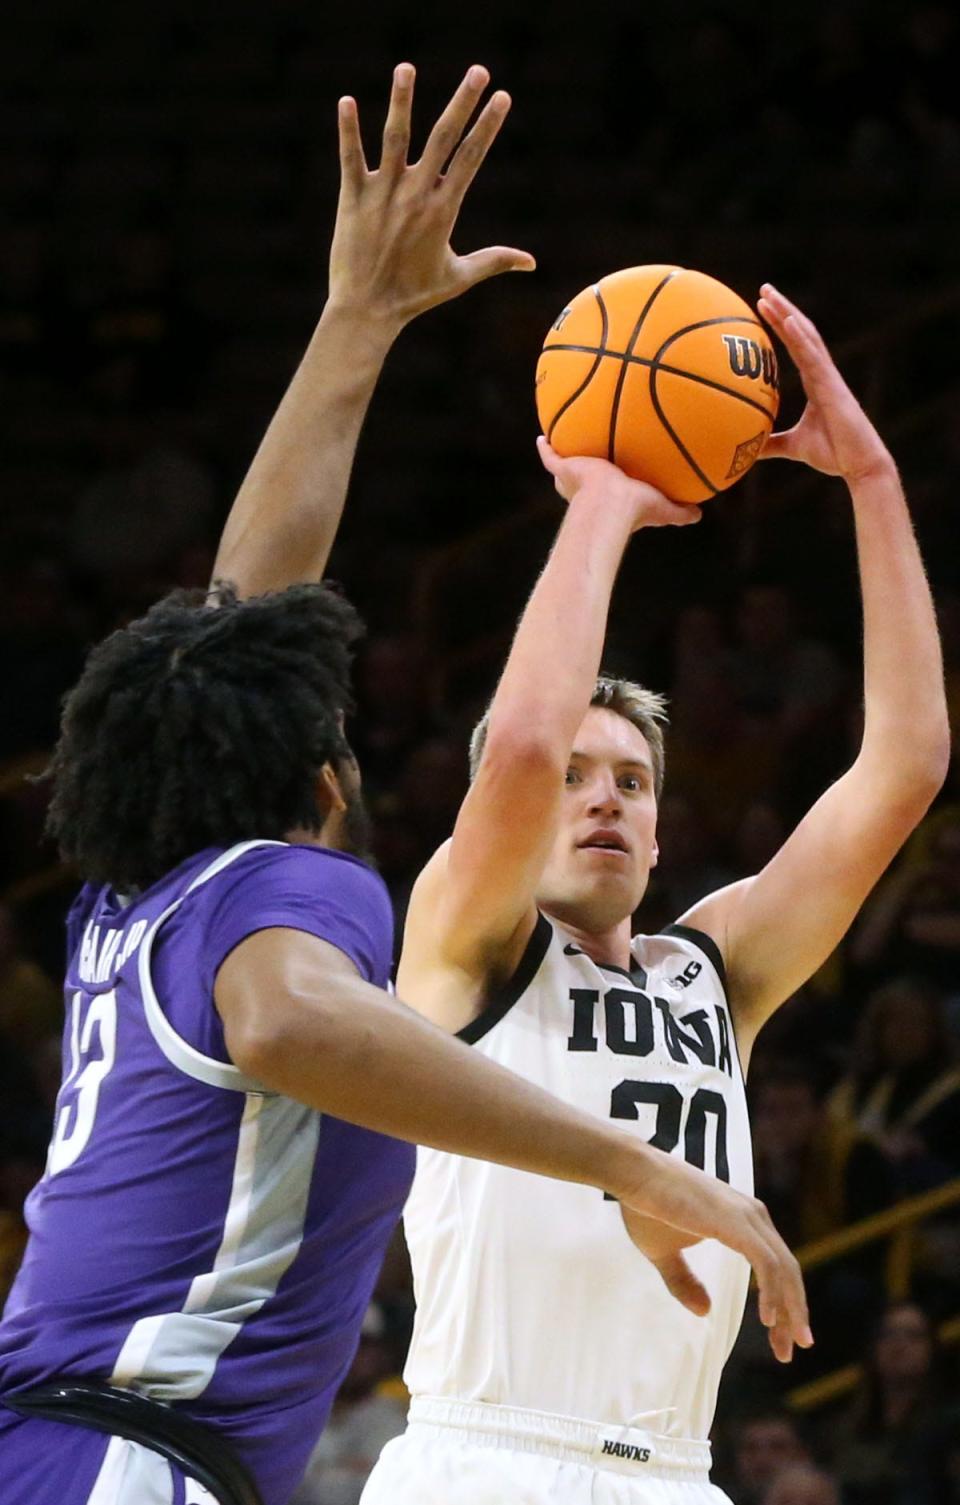 Iowa’s Payton Sandfort (20) shoots over Kansas State's Will McNair in a first-round NIT game Tuesday, at Carver-Hawkeye Arena in Iowa City, Iowa. Sandfort scored a career-high 30 points to lead Iowa.